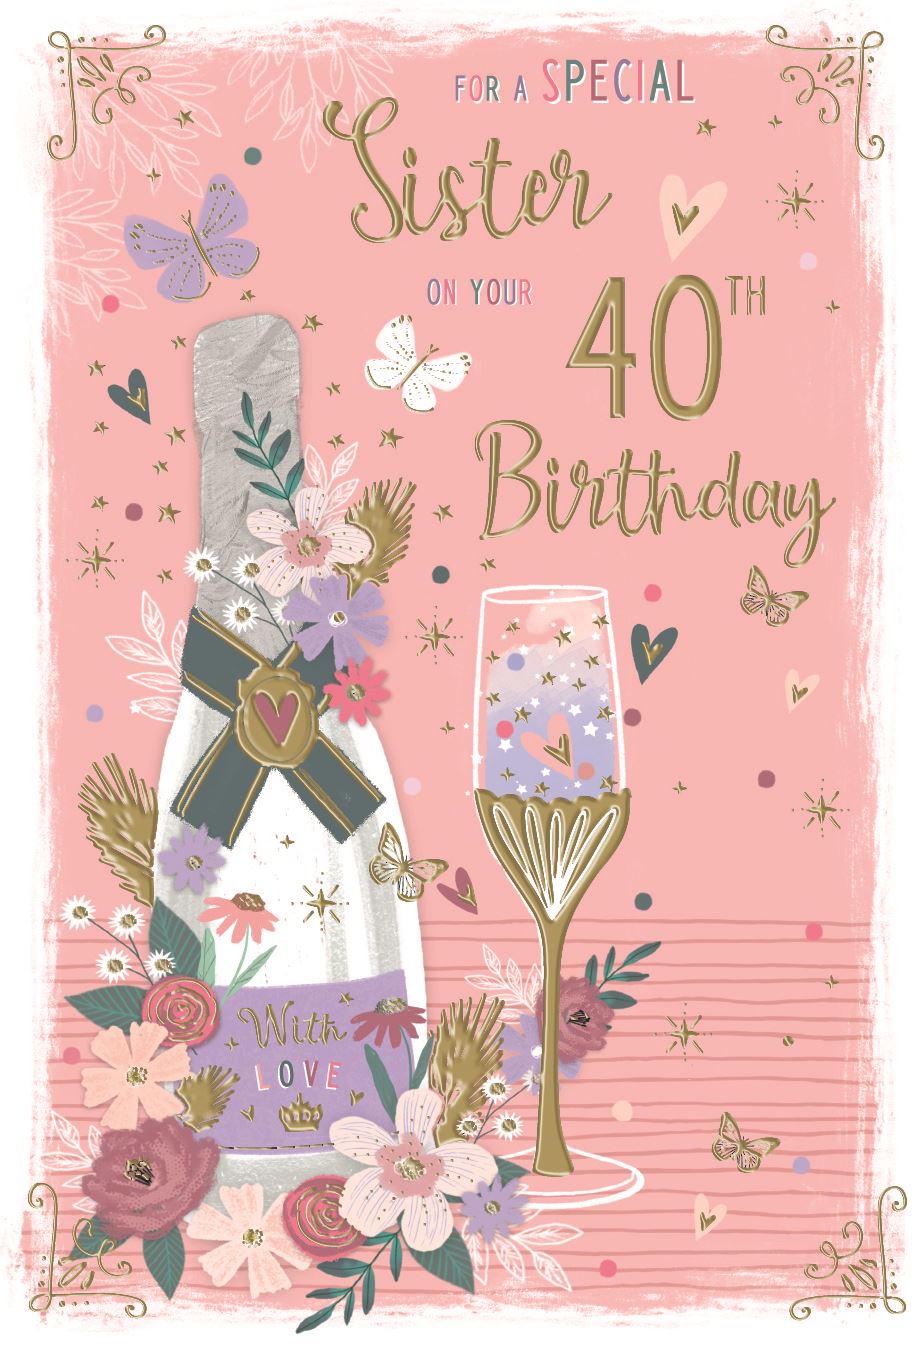 Sister 40th birthday card - birthday drinks and flowers